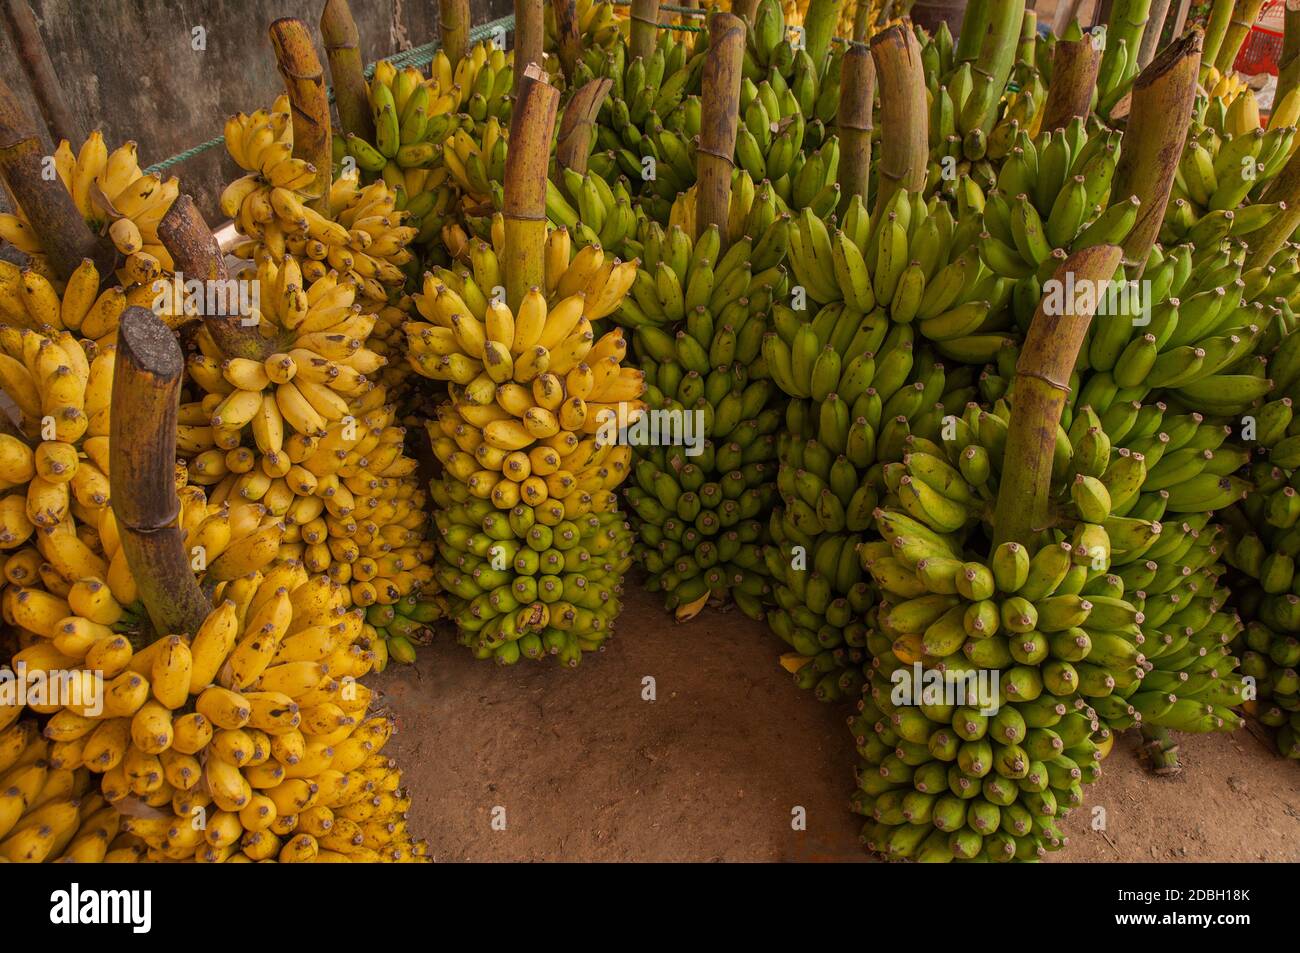 Fresh banana bunches after harvesting in Costa Rica Stock Photo